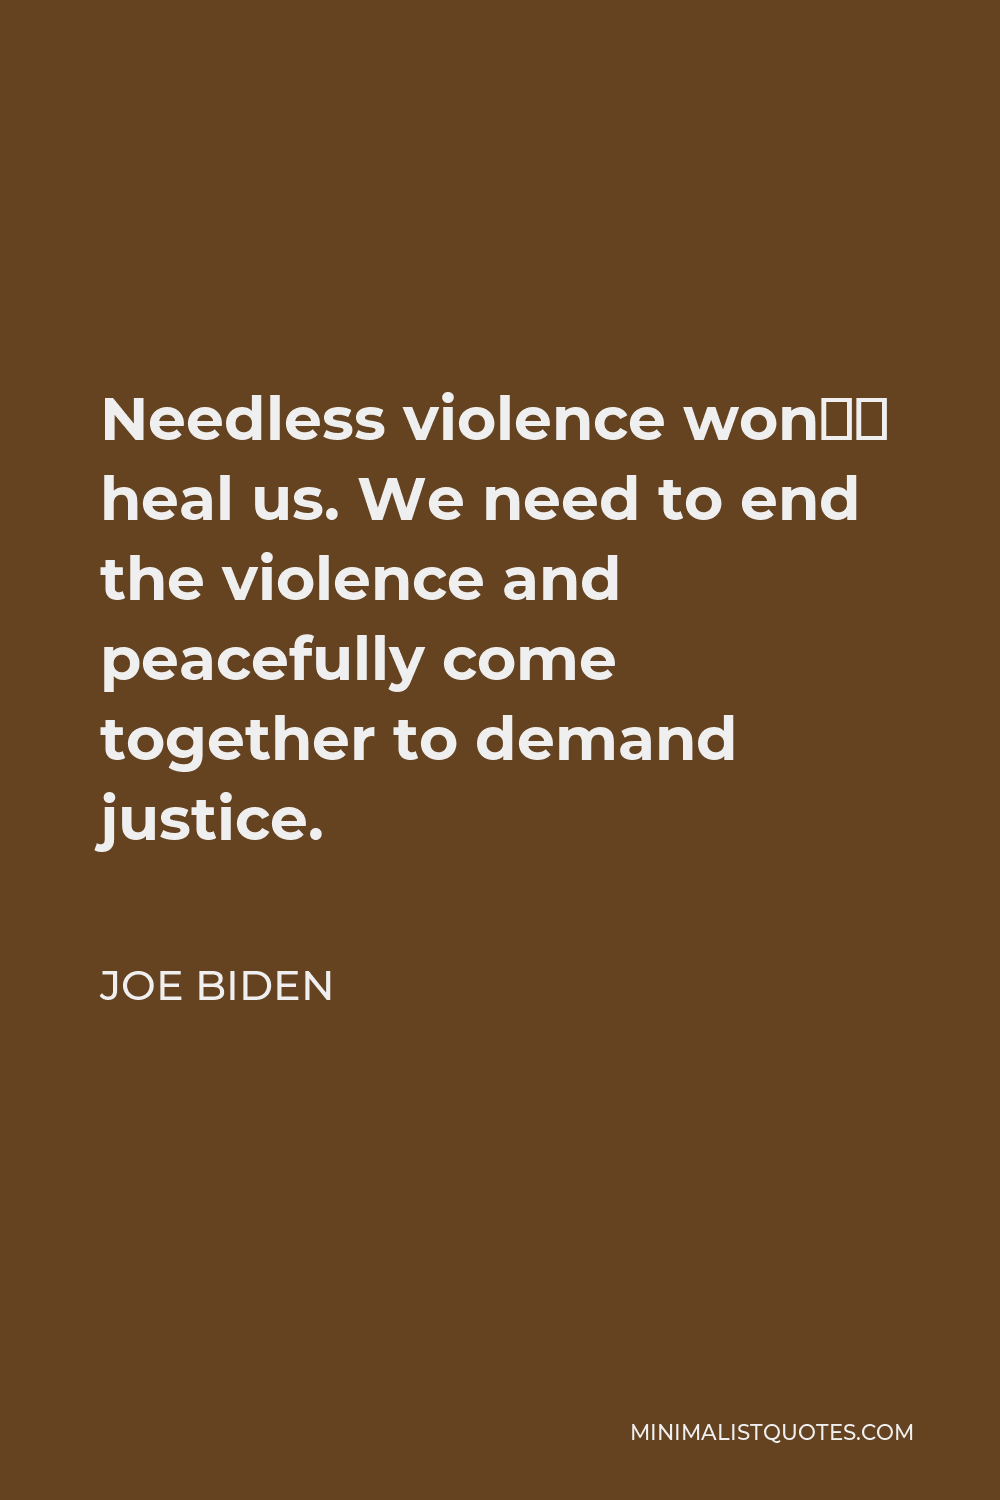 Joe Biden Quote - Needless violence won’t heal us. We need to end the violence and peacefully come together to demand justice.